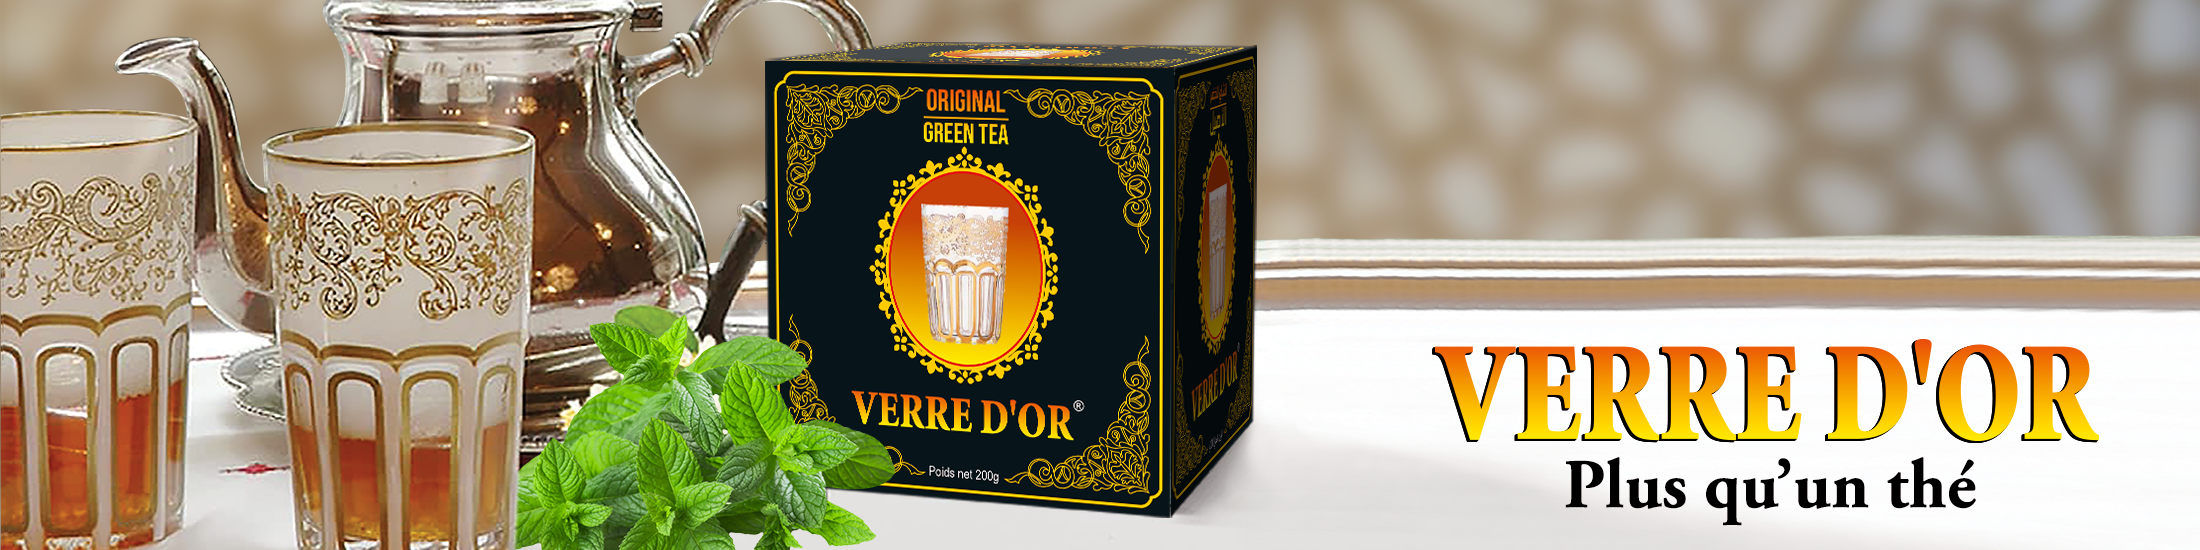 VERRE D'OR